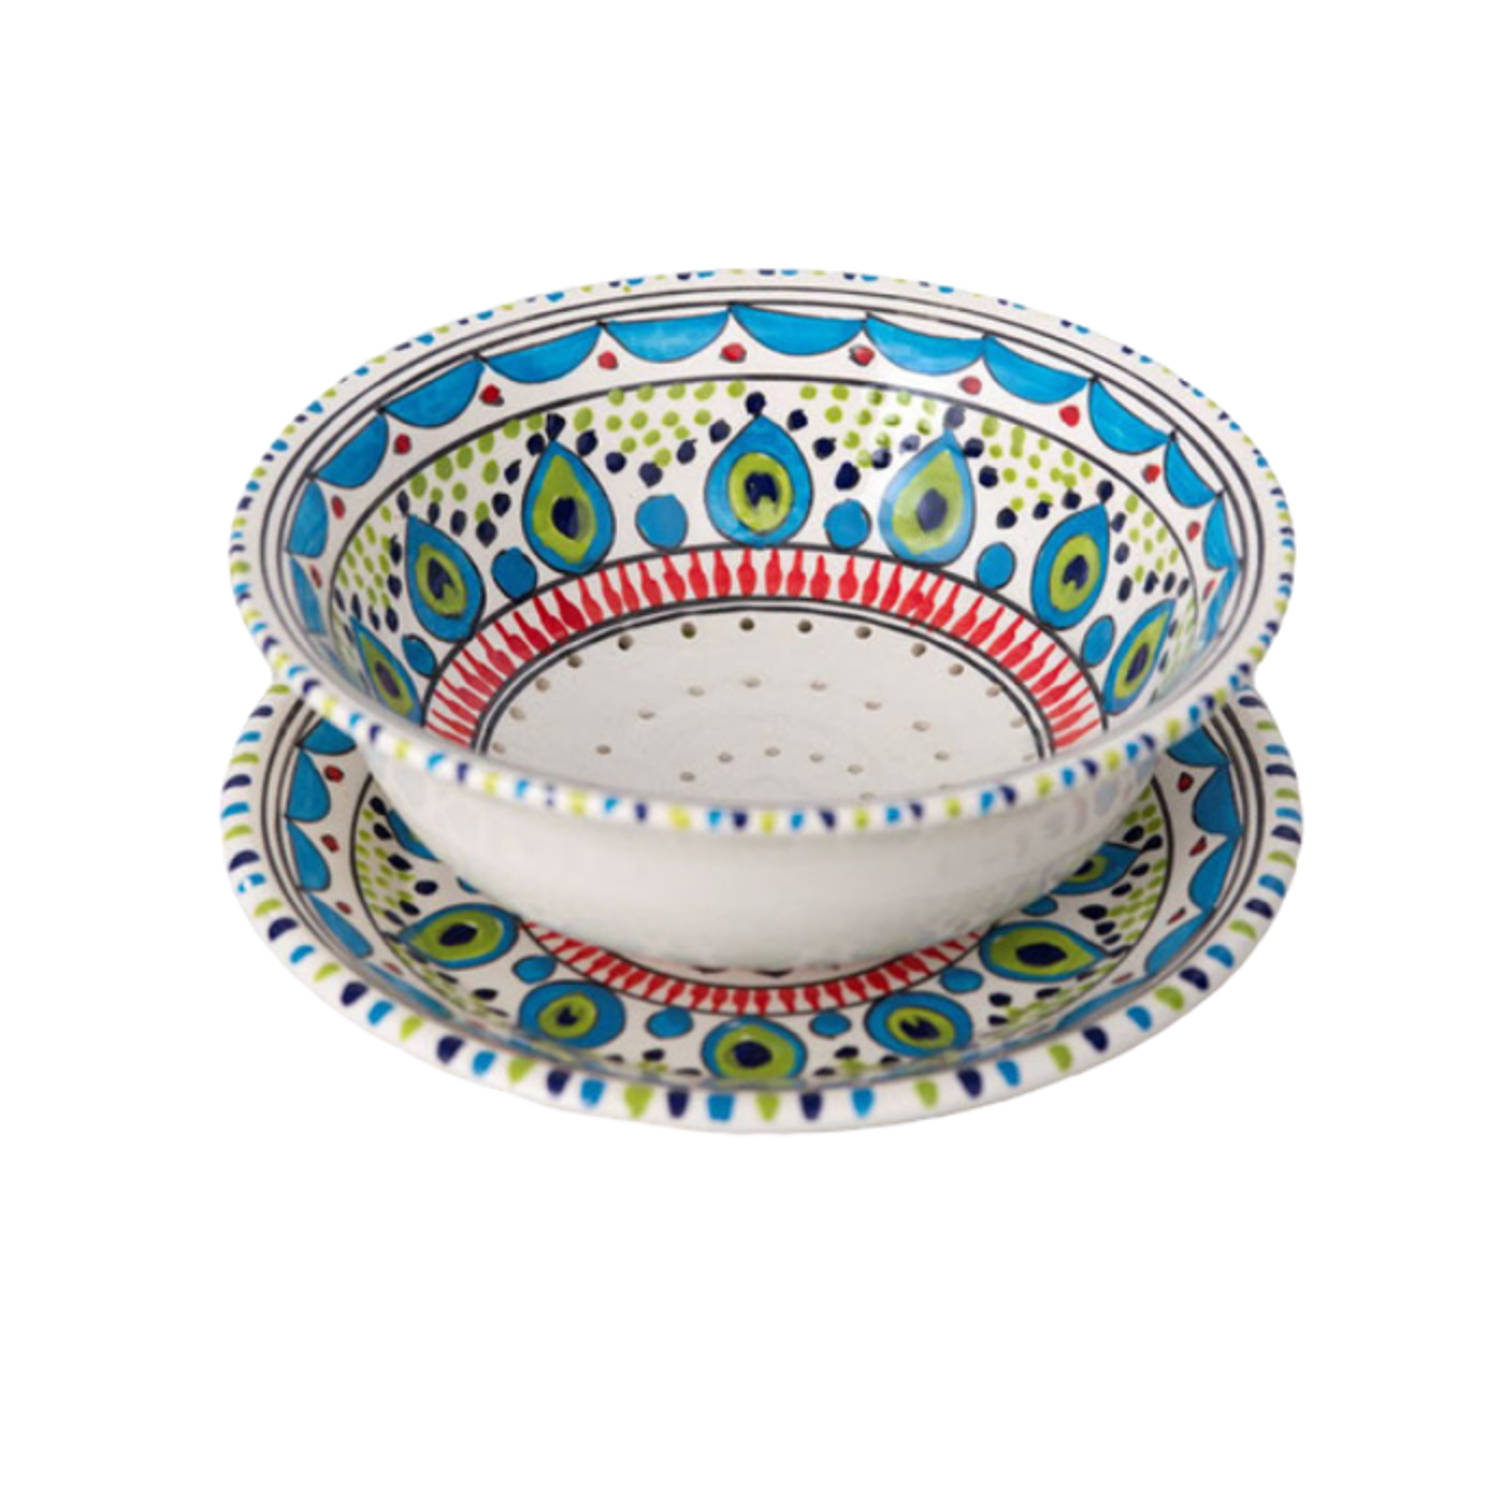 Fruit-test Pavo 20 cm FT.PA.20 Dishes & Deco